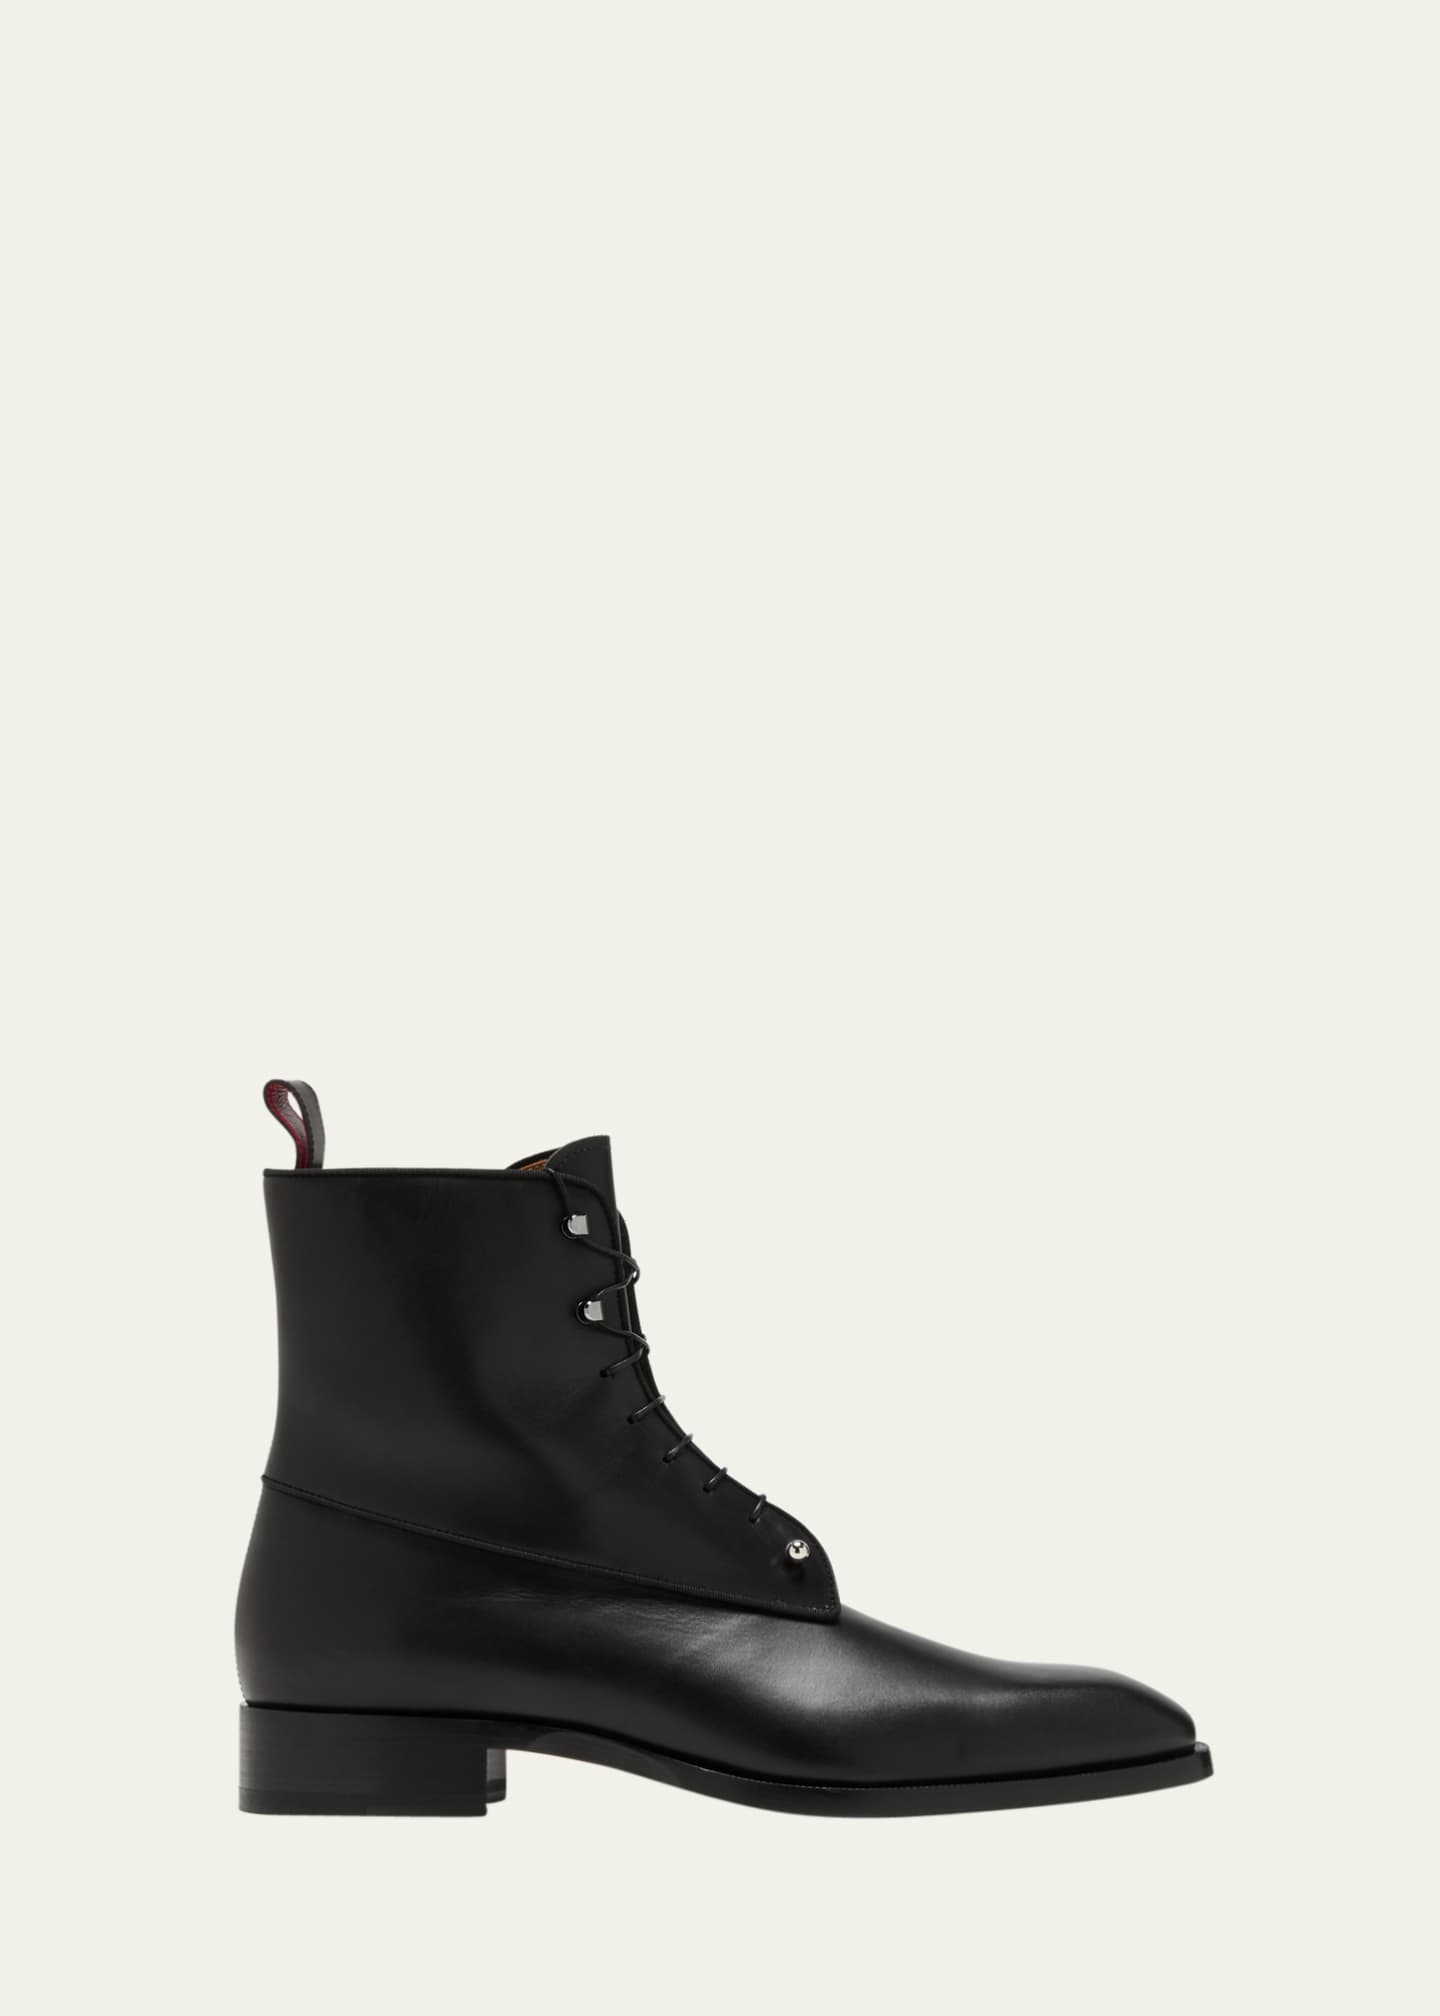 Christian Louboutin Men's Chambeliboot Leather Lace-Up Ankle Boots ...